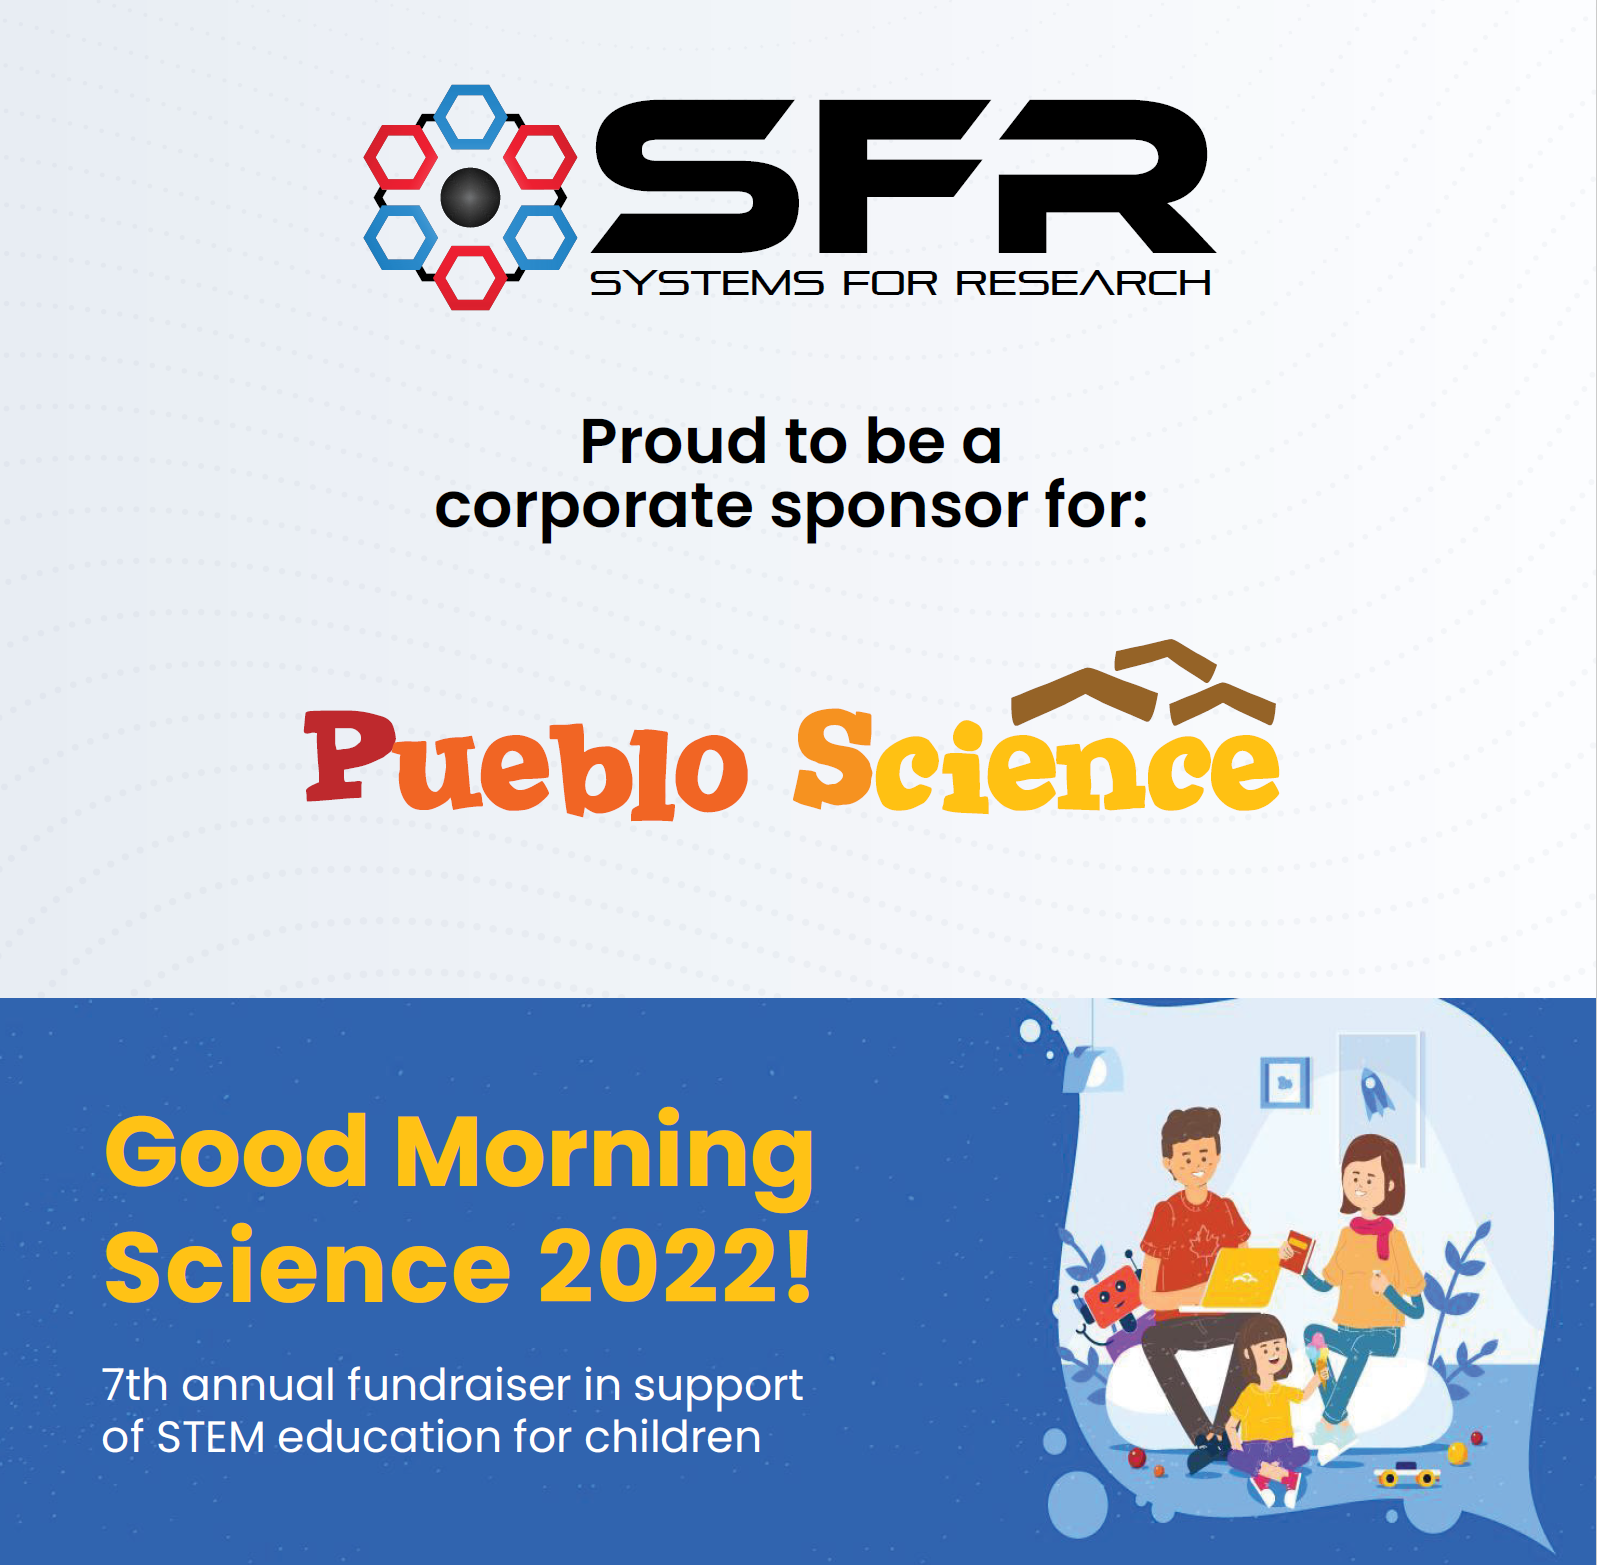 Systems for Research Corporate Sponsor for Good Morning Science 2022!